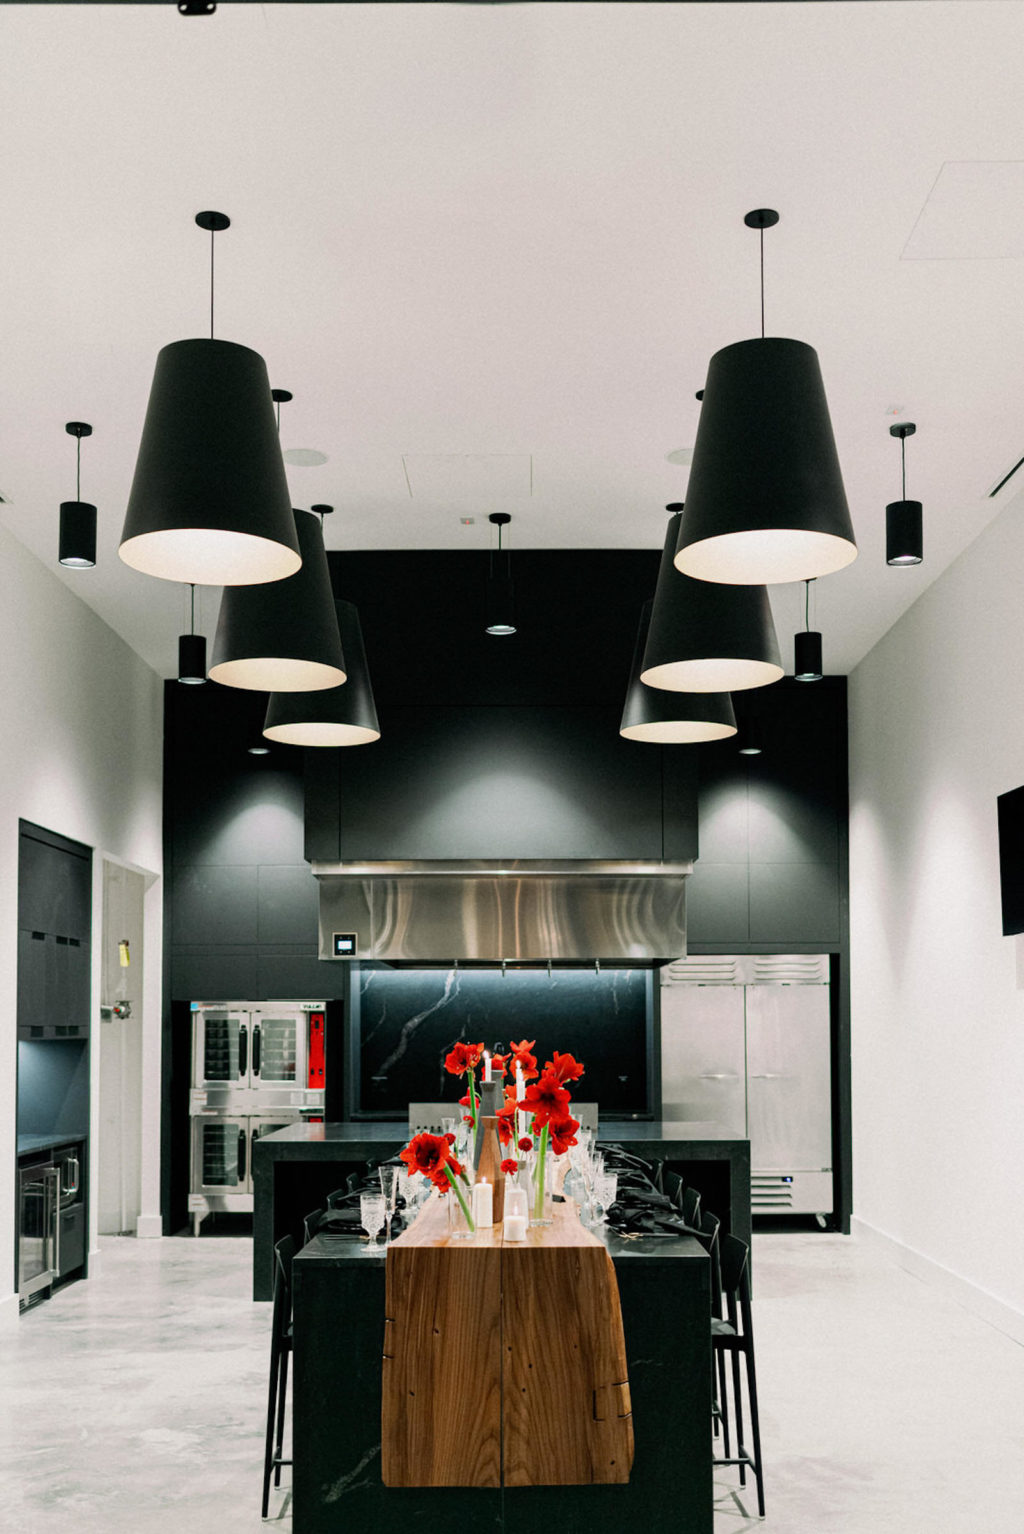 Modern Indoor South Tampa Wedding Space at Tampa Wedding Venue Hyde House | Test Kitchen Private Dinner Chef's Table Intimate Wedding | Long Black Feasting Table with Live Edge Wood and Red Amaryllis Bud Vase Centerpieces